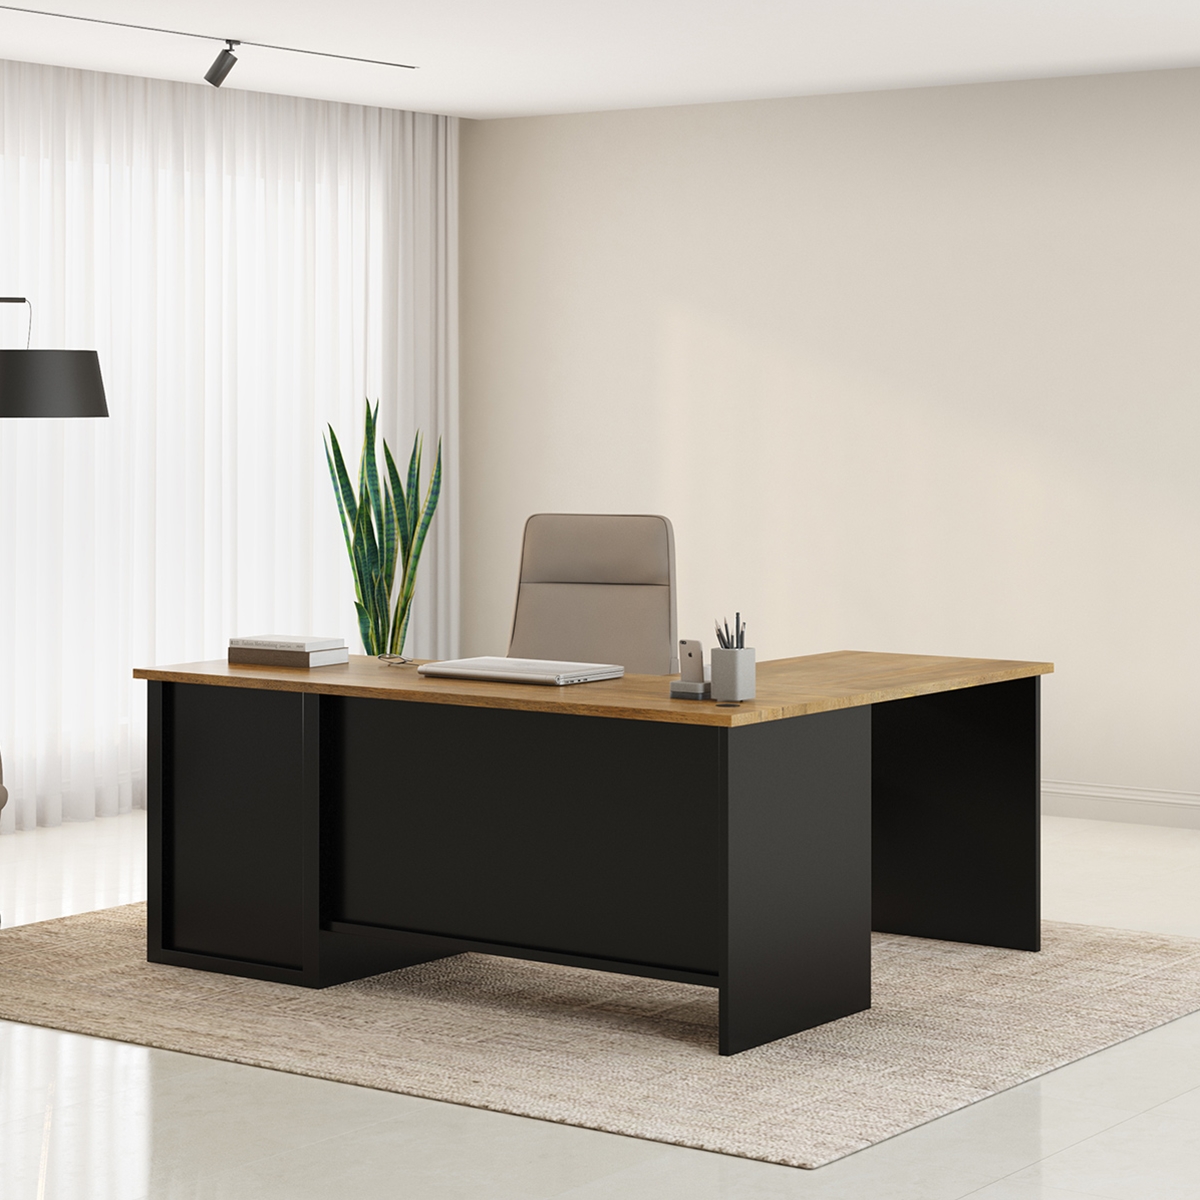 https://www.sierralivingconcepts.com/images/thumbs/0412541_kristiansand-solid-wood-l-shaped-home-office-desk-with-file-cabinets.jpeg